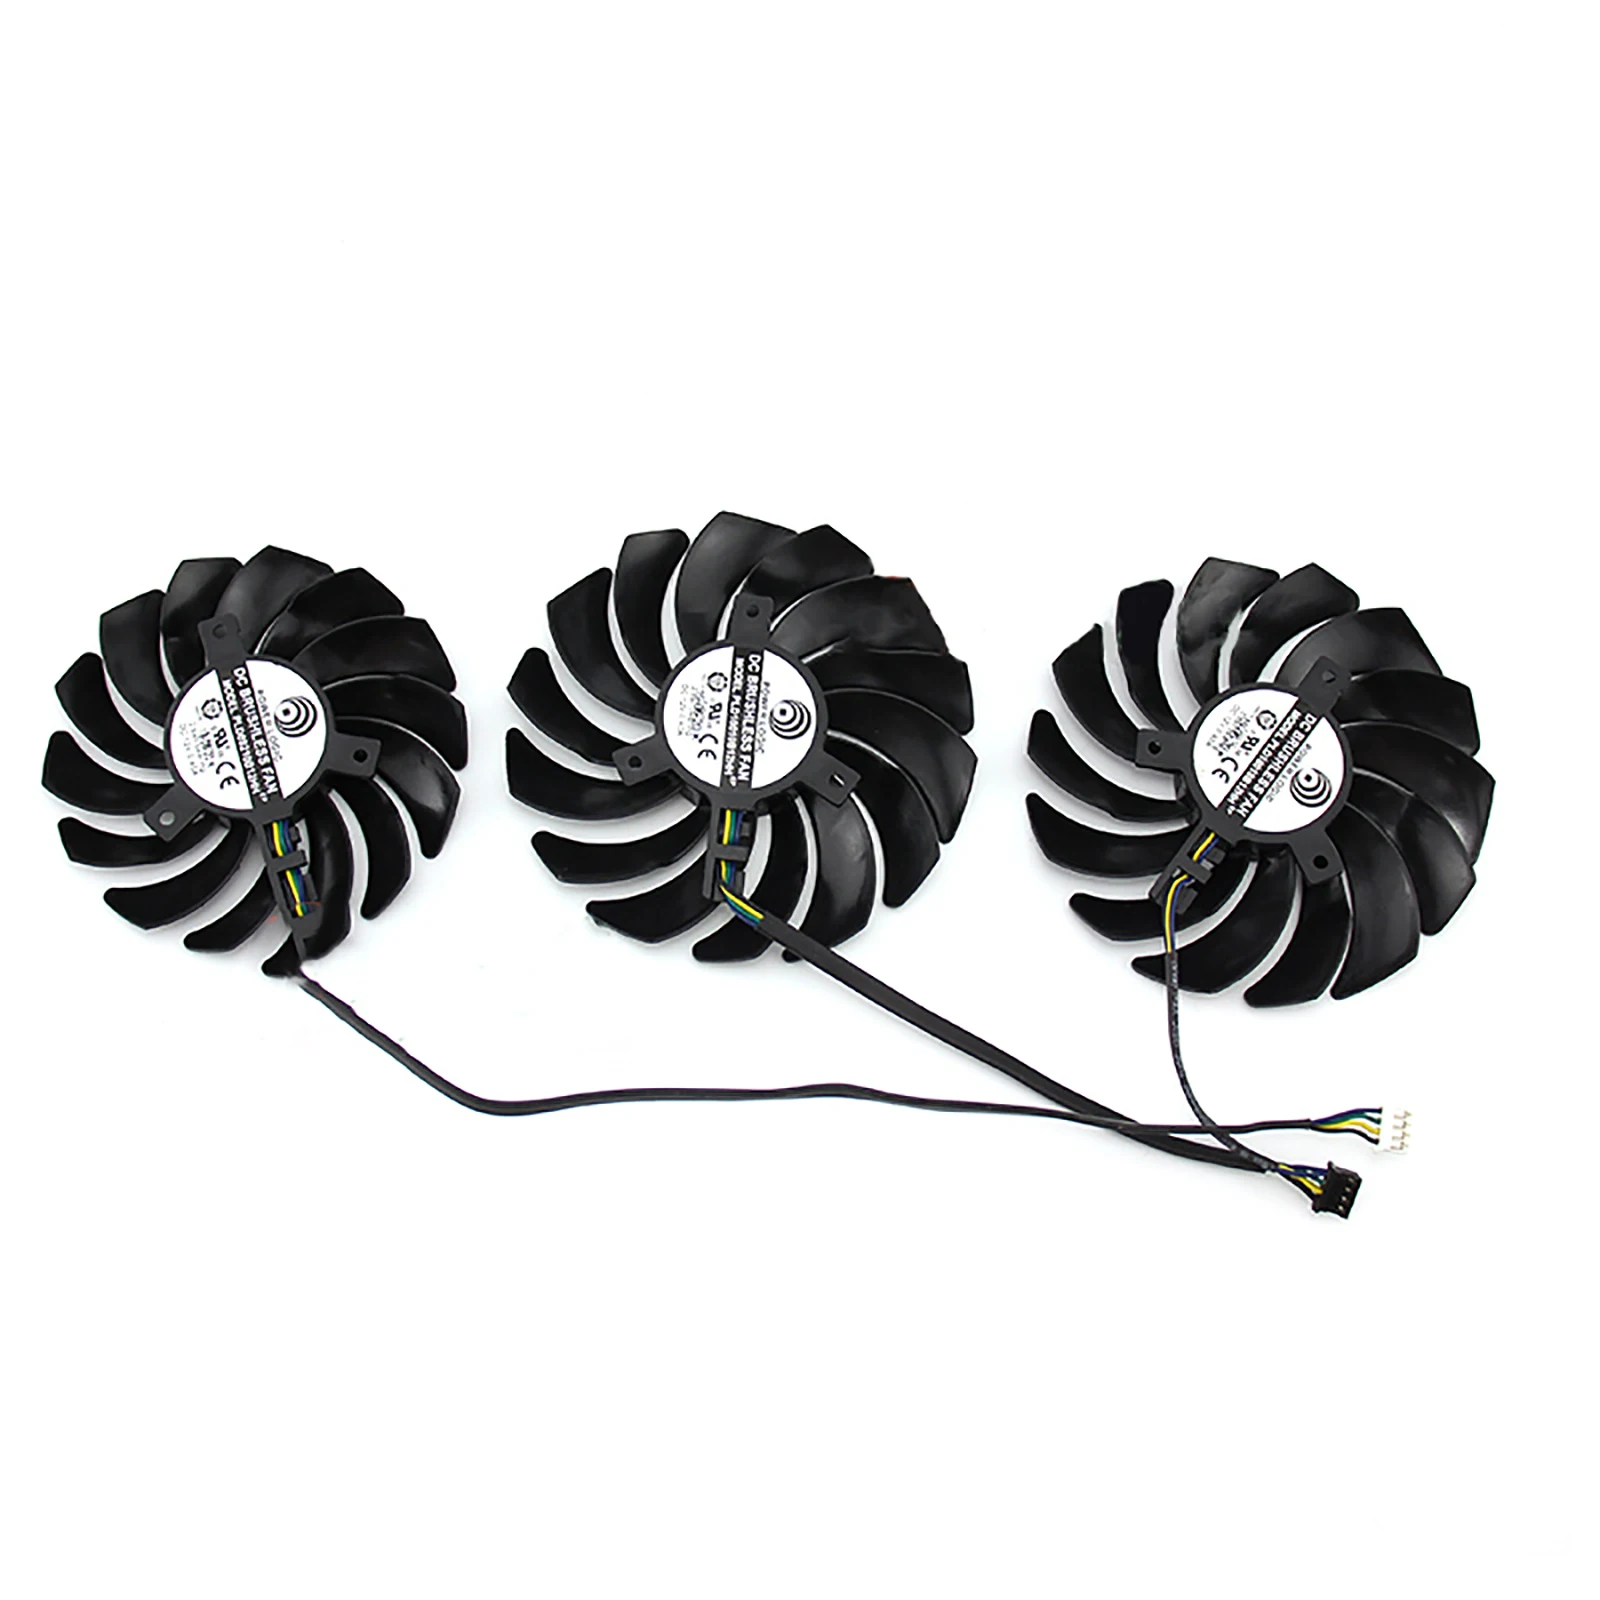 

Replacement Graphics Card Cooling Fan for MSI Rtx2080ti 2080 2070 Gaming X Trio Cooler Fan Spare Parts